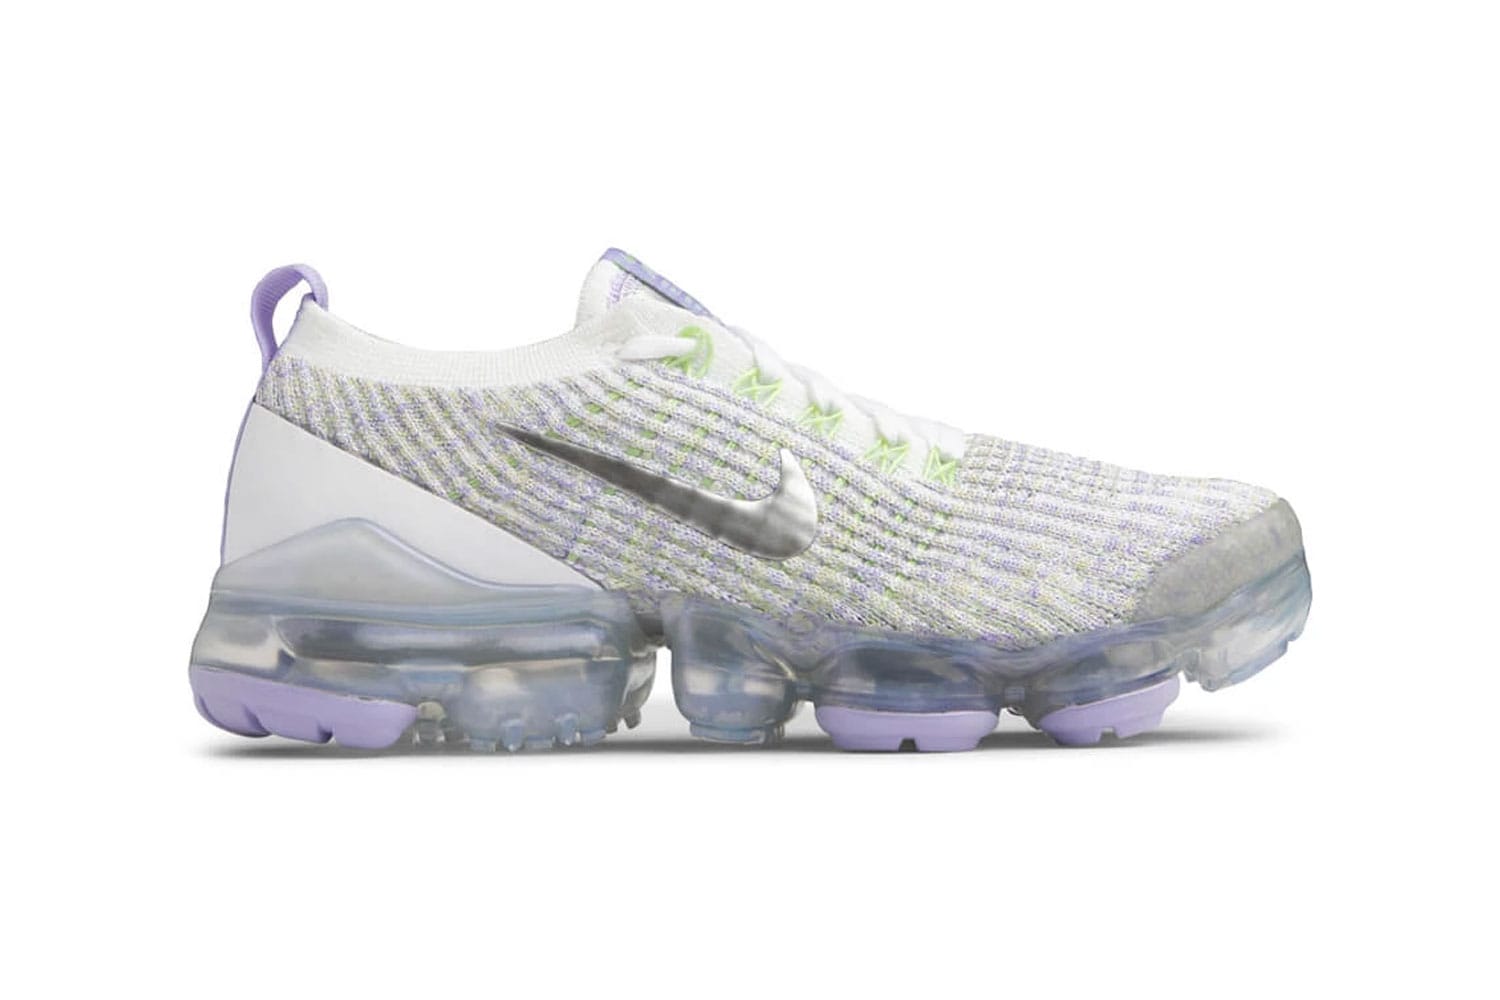 white and green vapormax